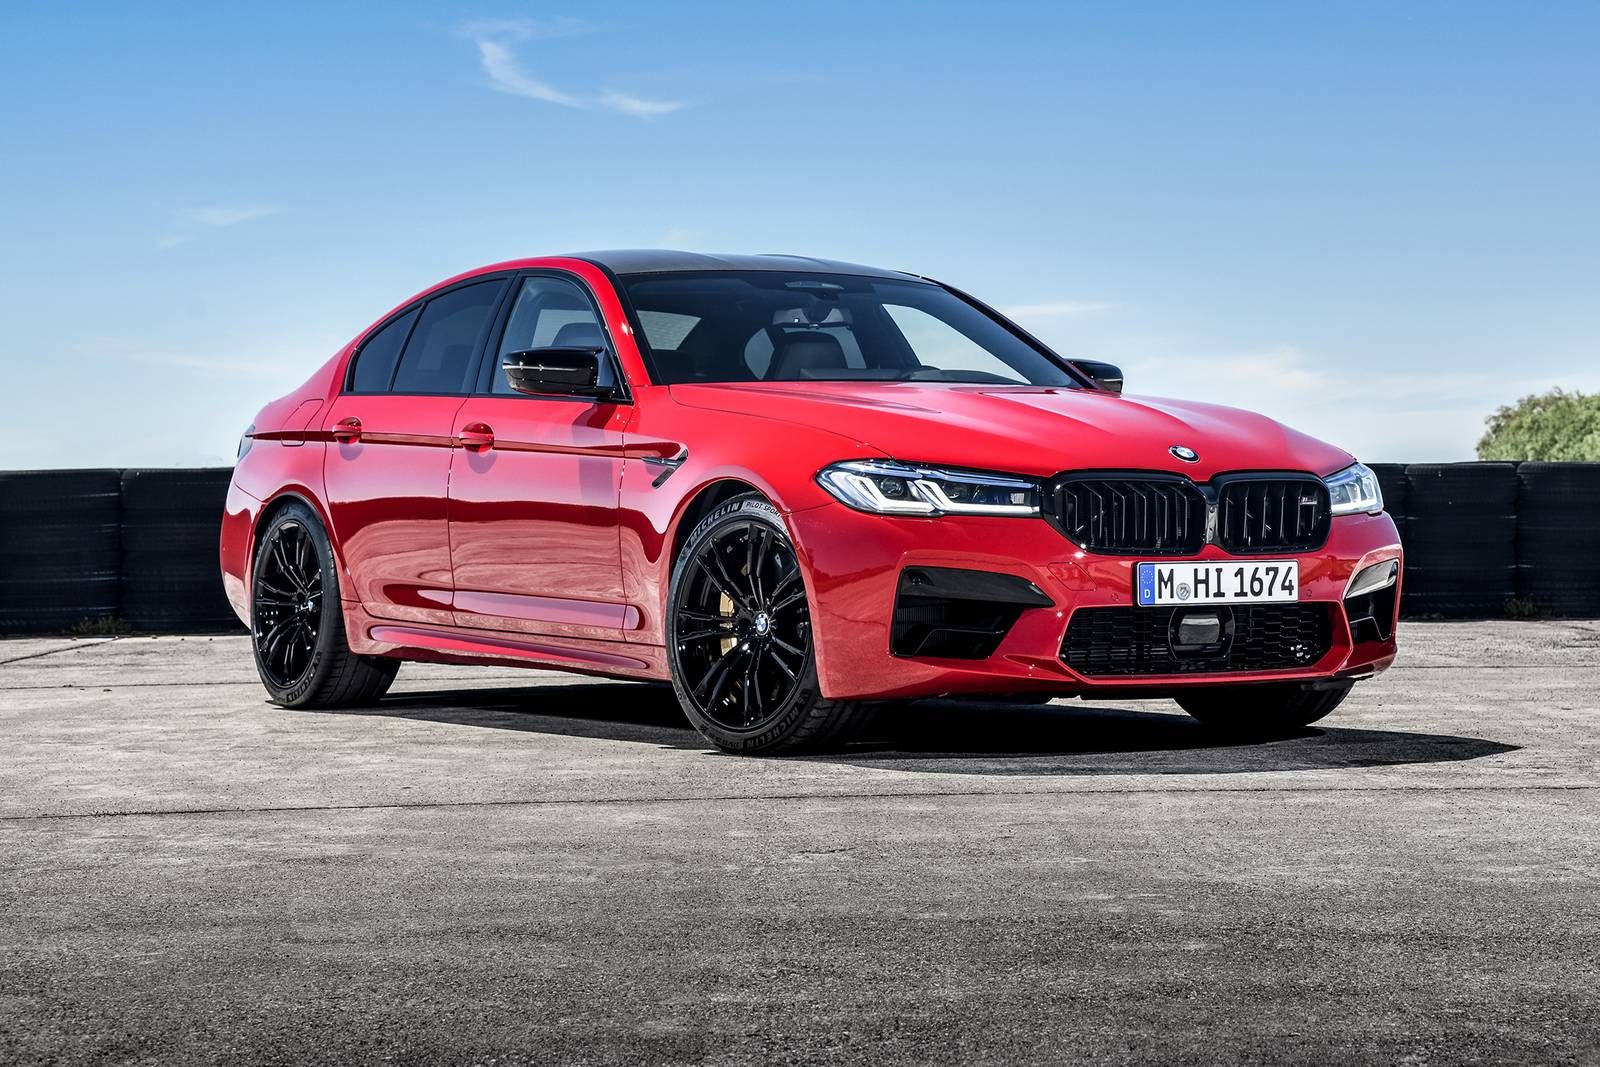 2021 BMW M5 in red